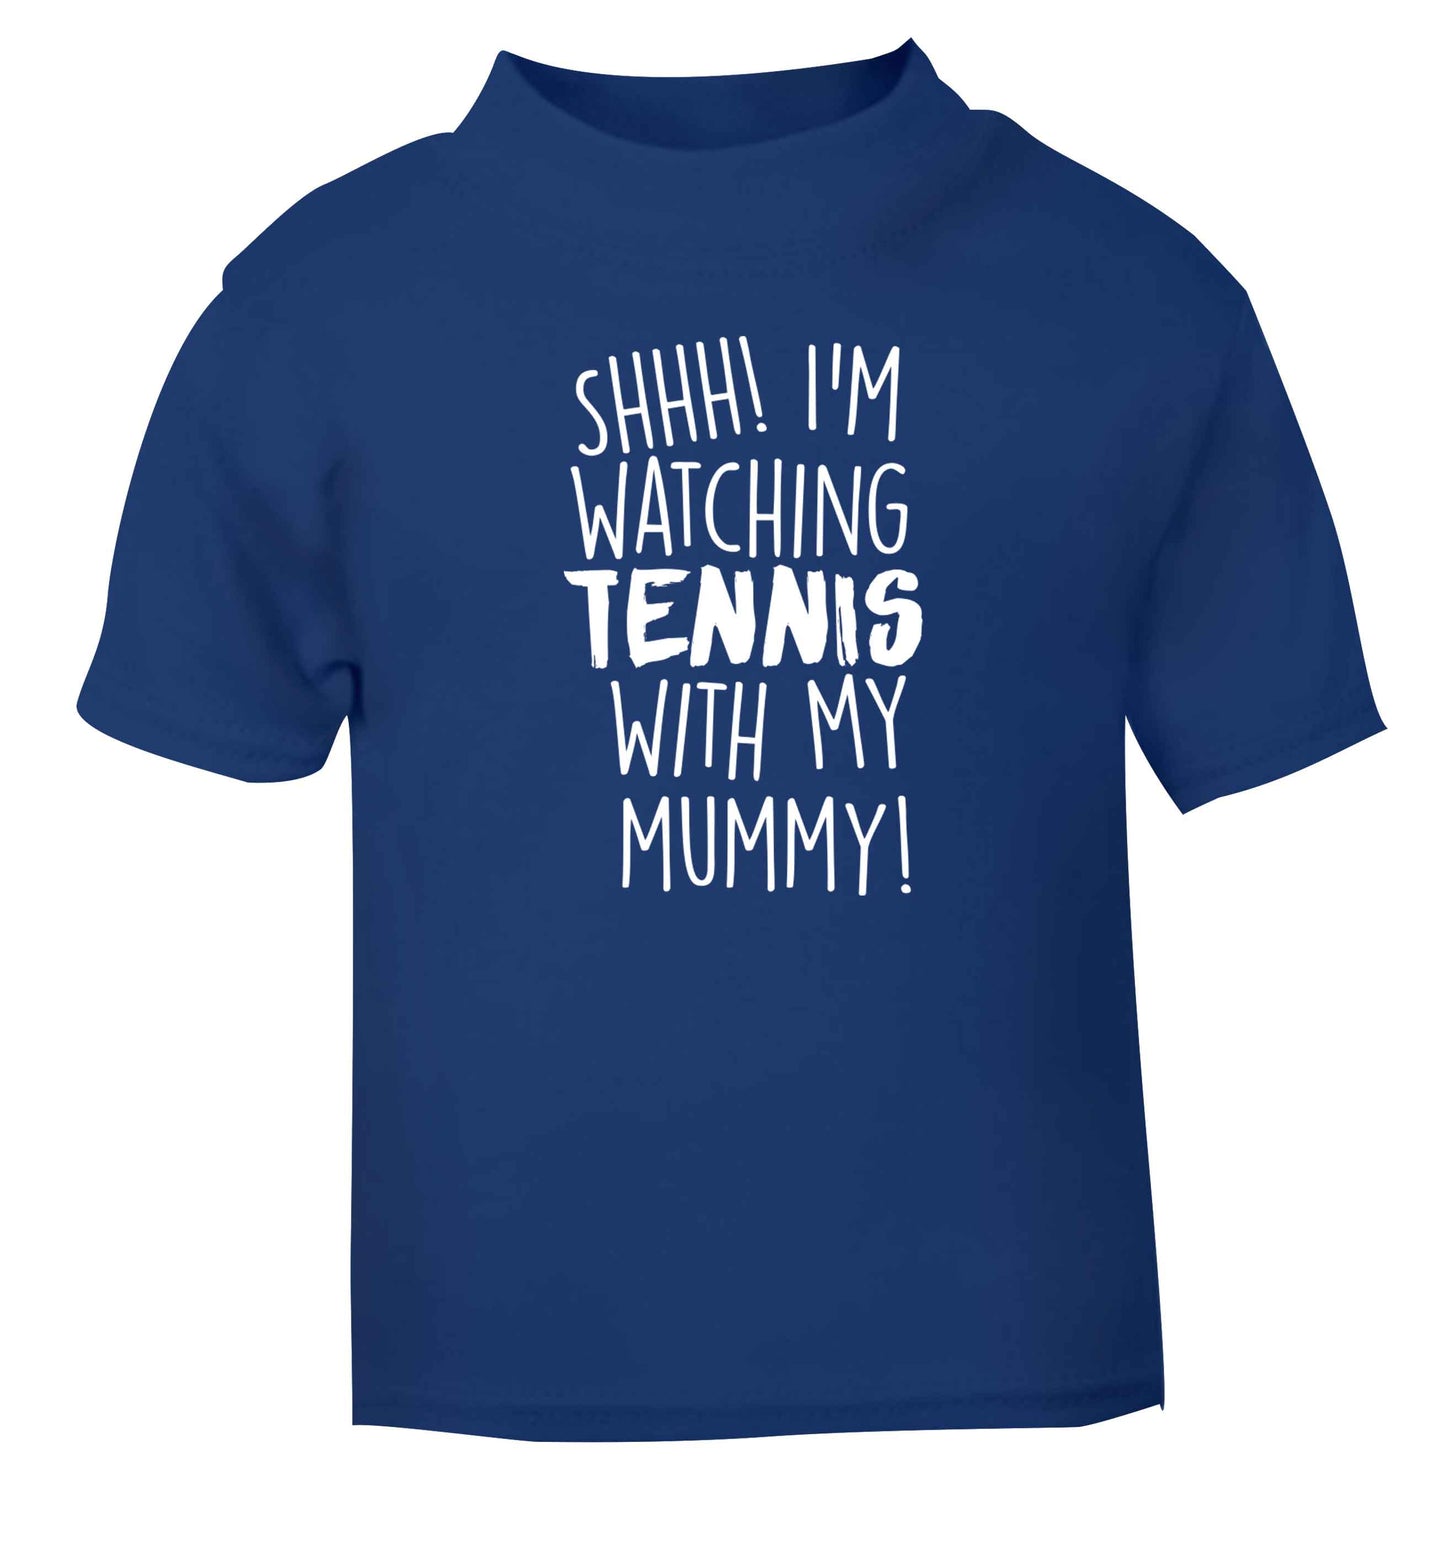 Shh! I'm watching tennis with my mummy! blue Baby Toddler Tshirt 2 Years